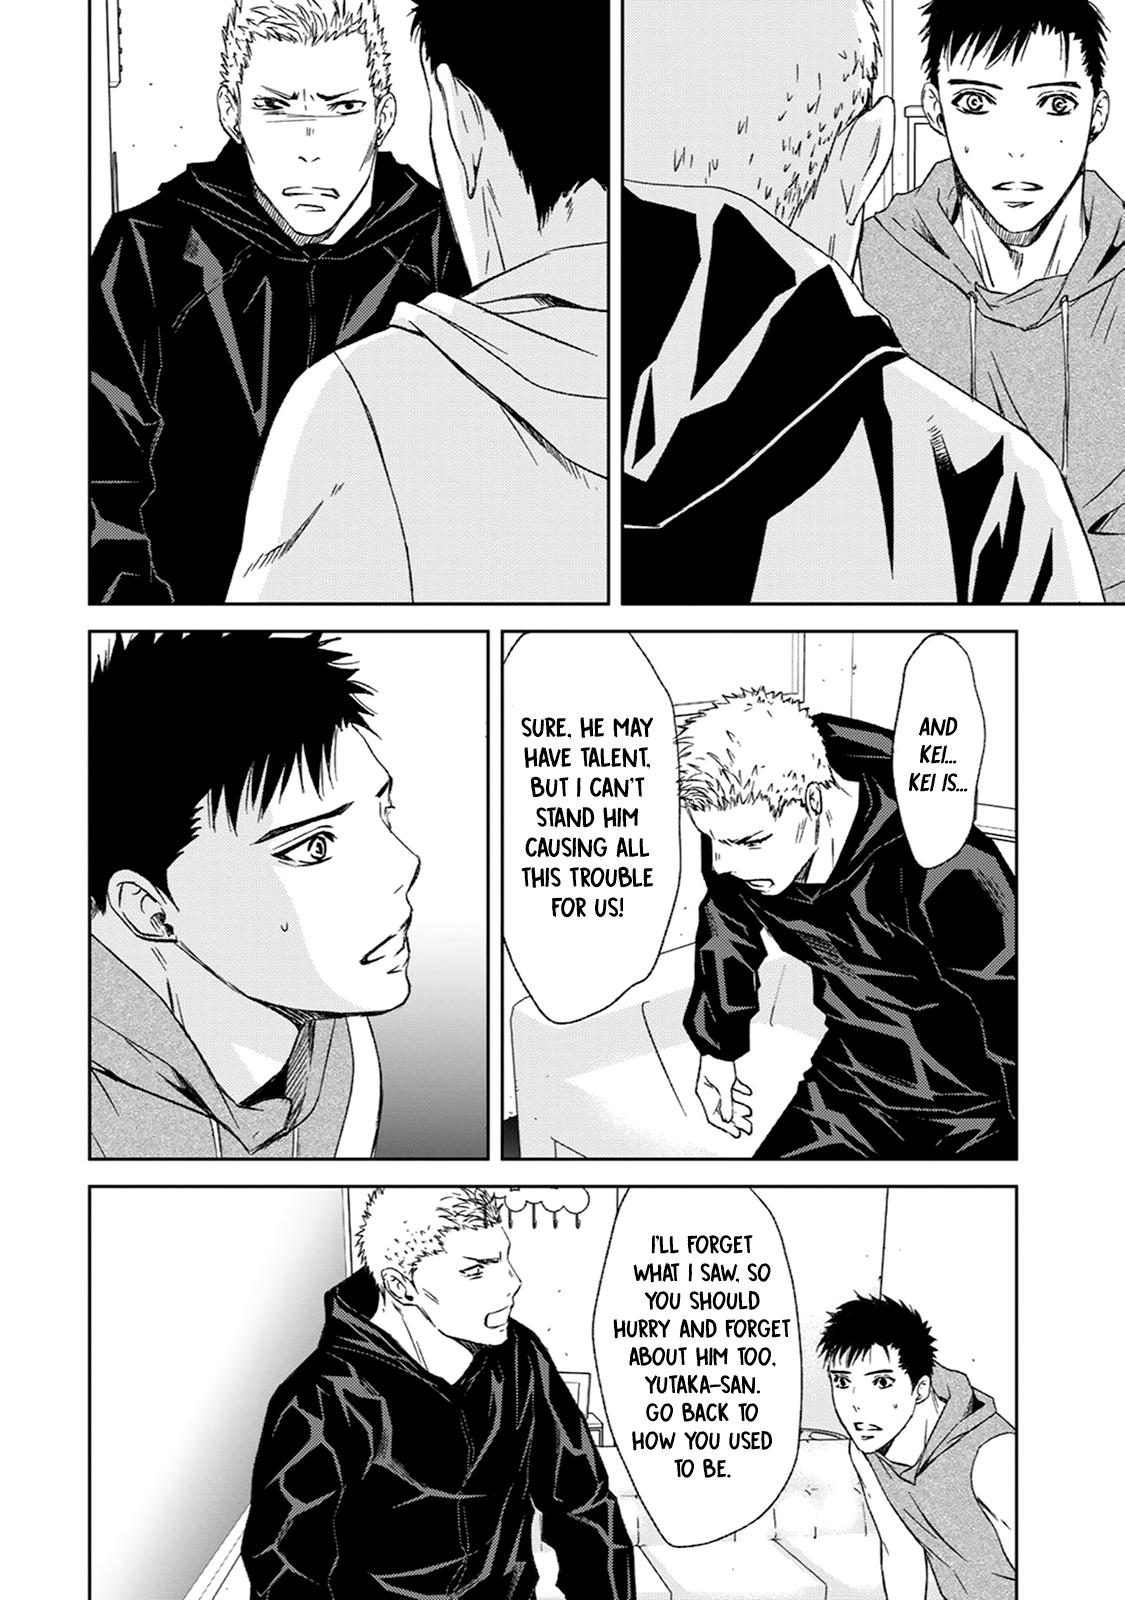 I Can Copy Talents Ch.51 Page 2 - Mangago